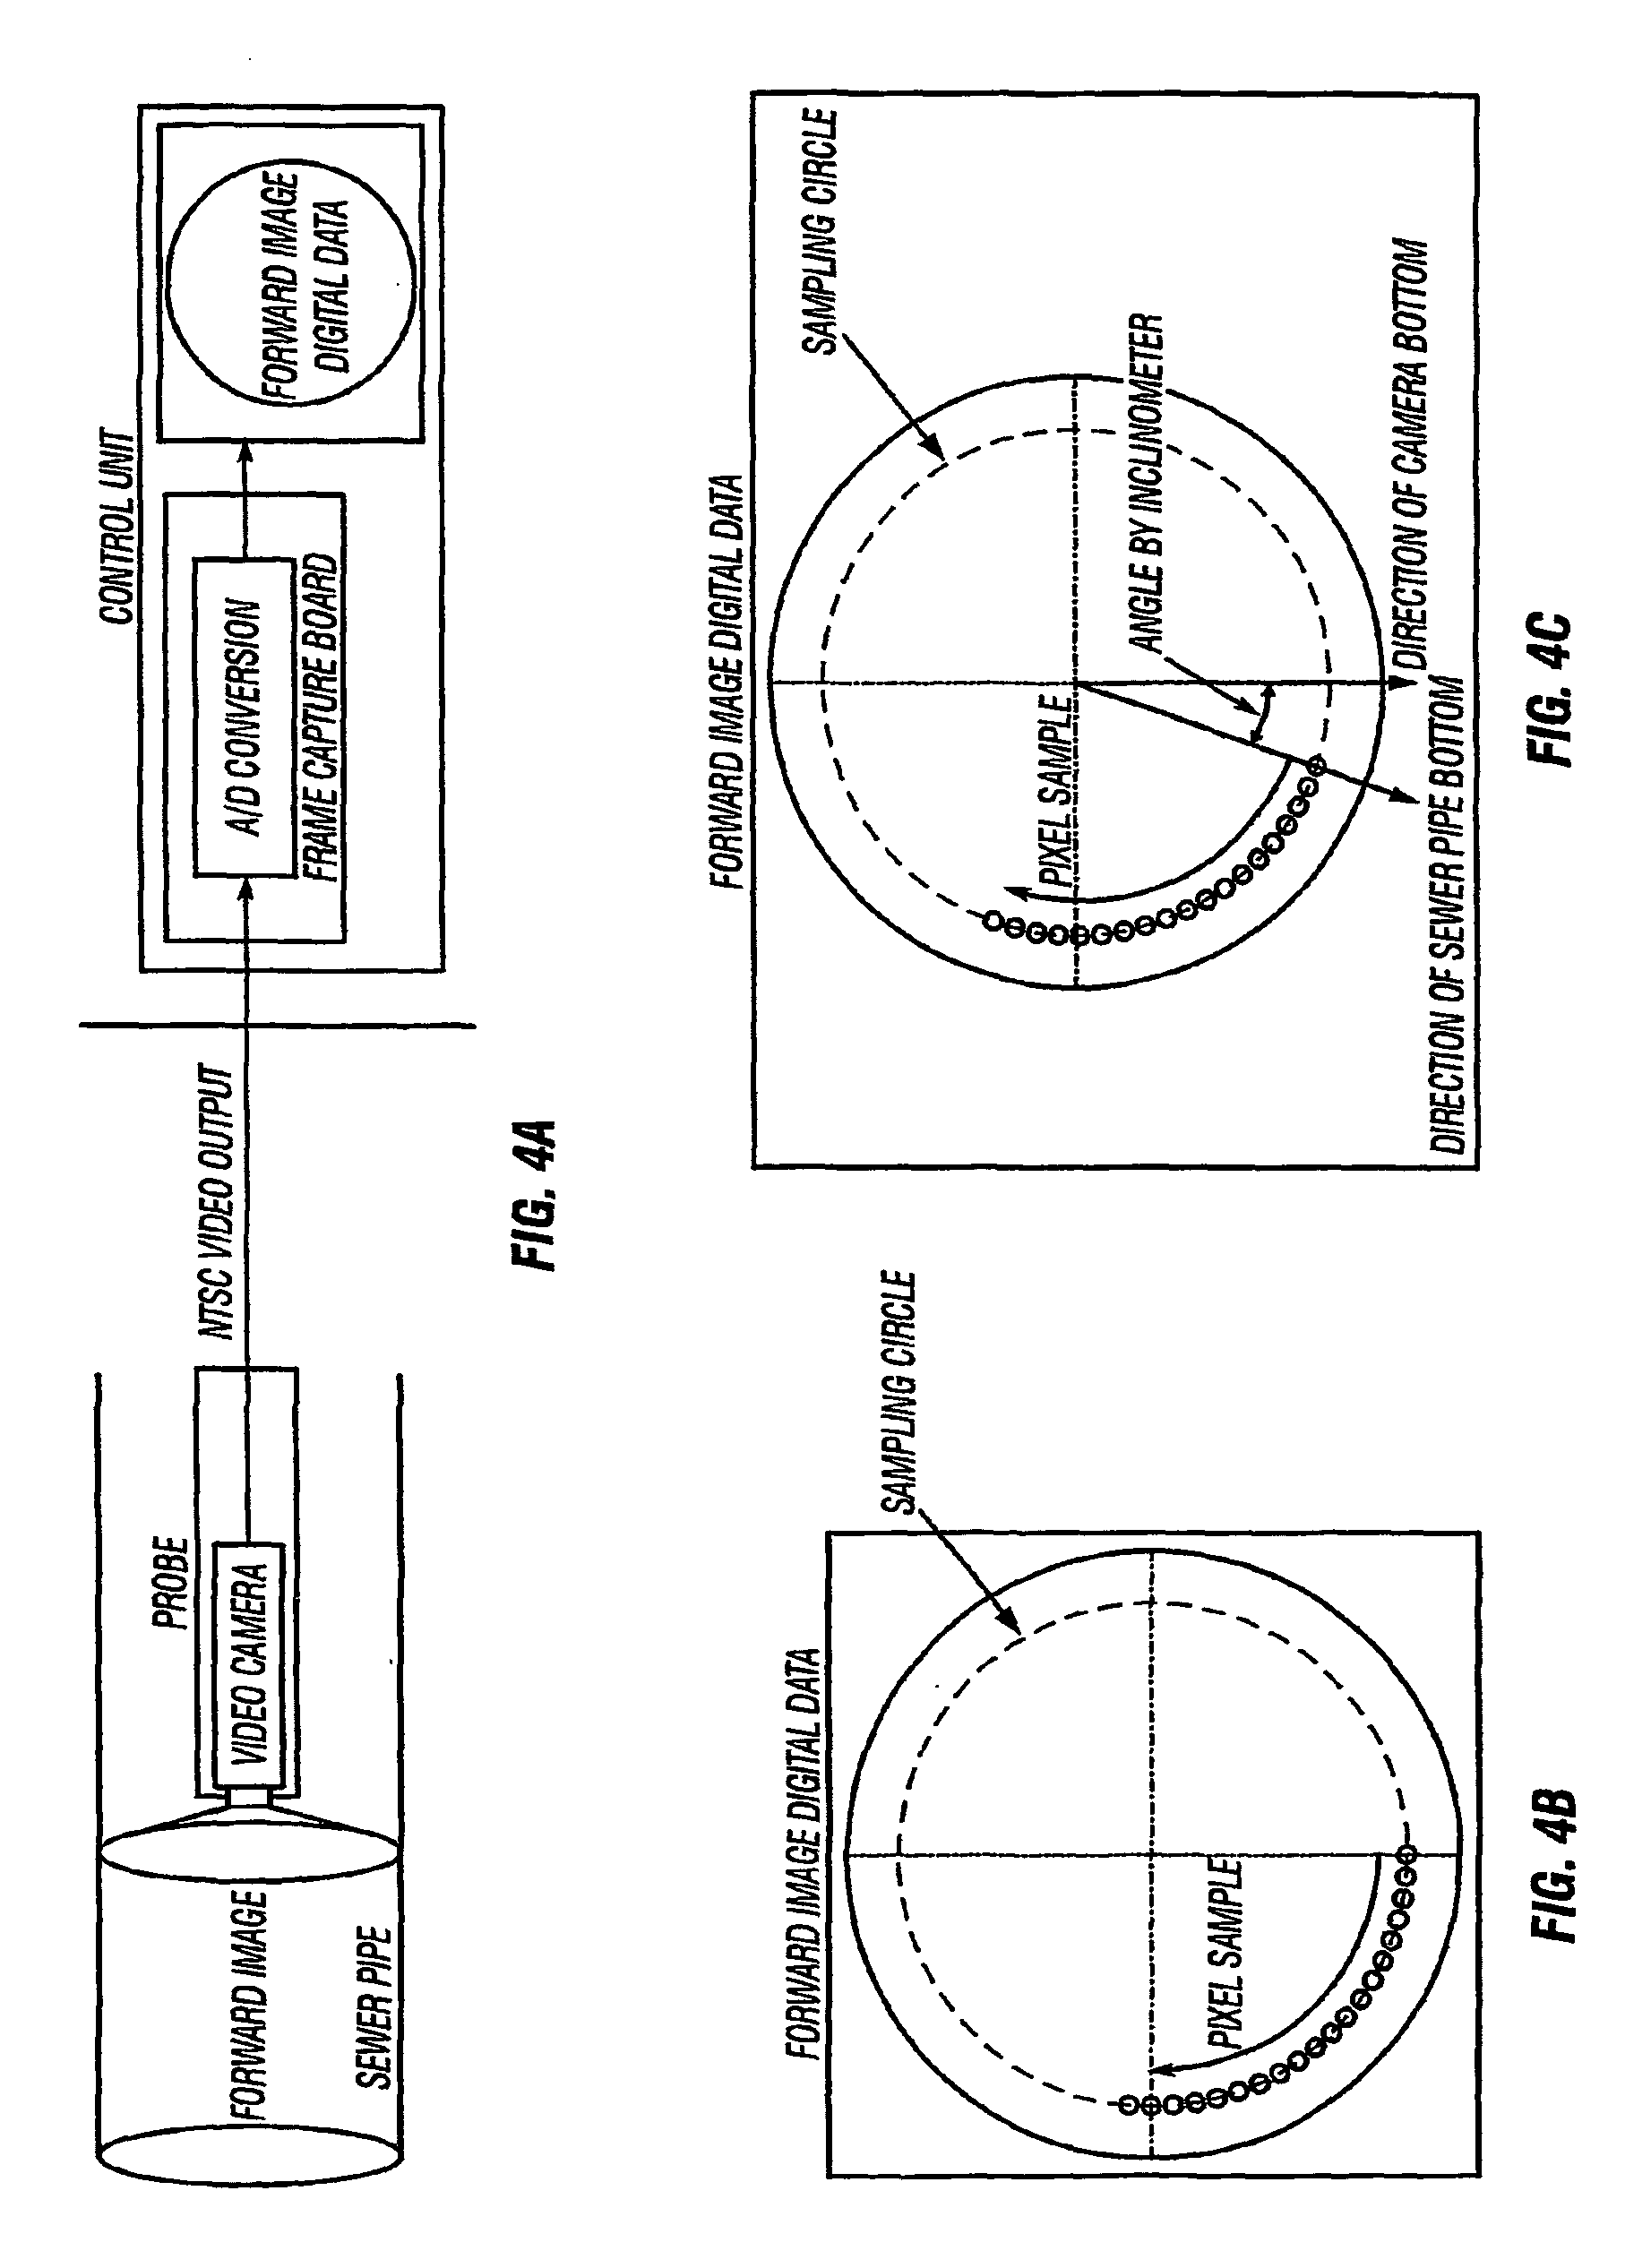 Apparatus and method for detecting pipeline defects